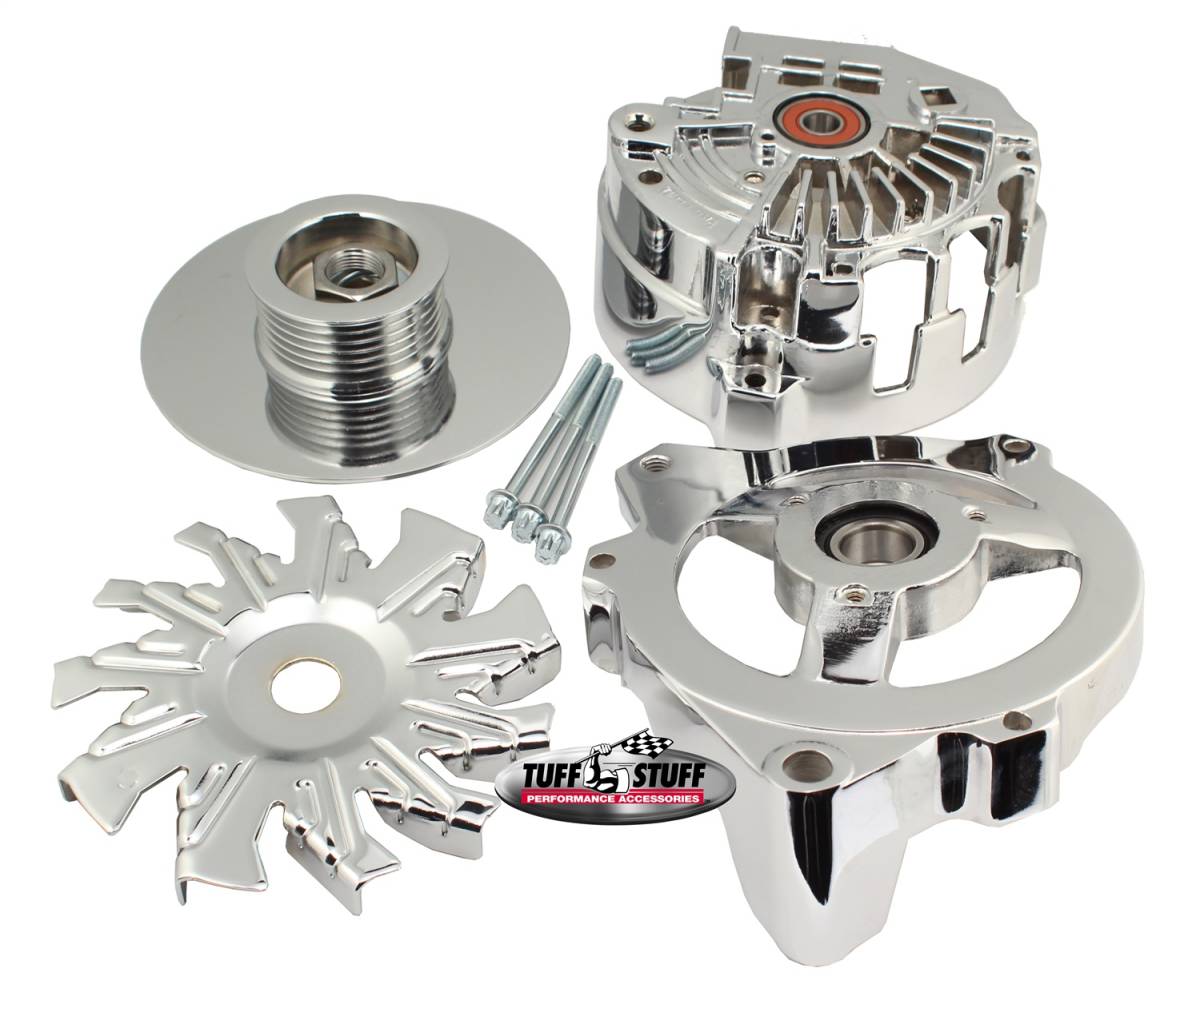 Tuff Stuff Performance - Alternator Case Kit Fits GM CS130 w/6 Groove Pulley And Tuff Stuff Alternator PN[7861] Incl. Front And Rear Housings/Fan/Pulley/Nut/Lockwashers/Thru Bolts Chrome Plated 7500F